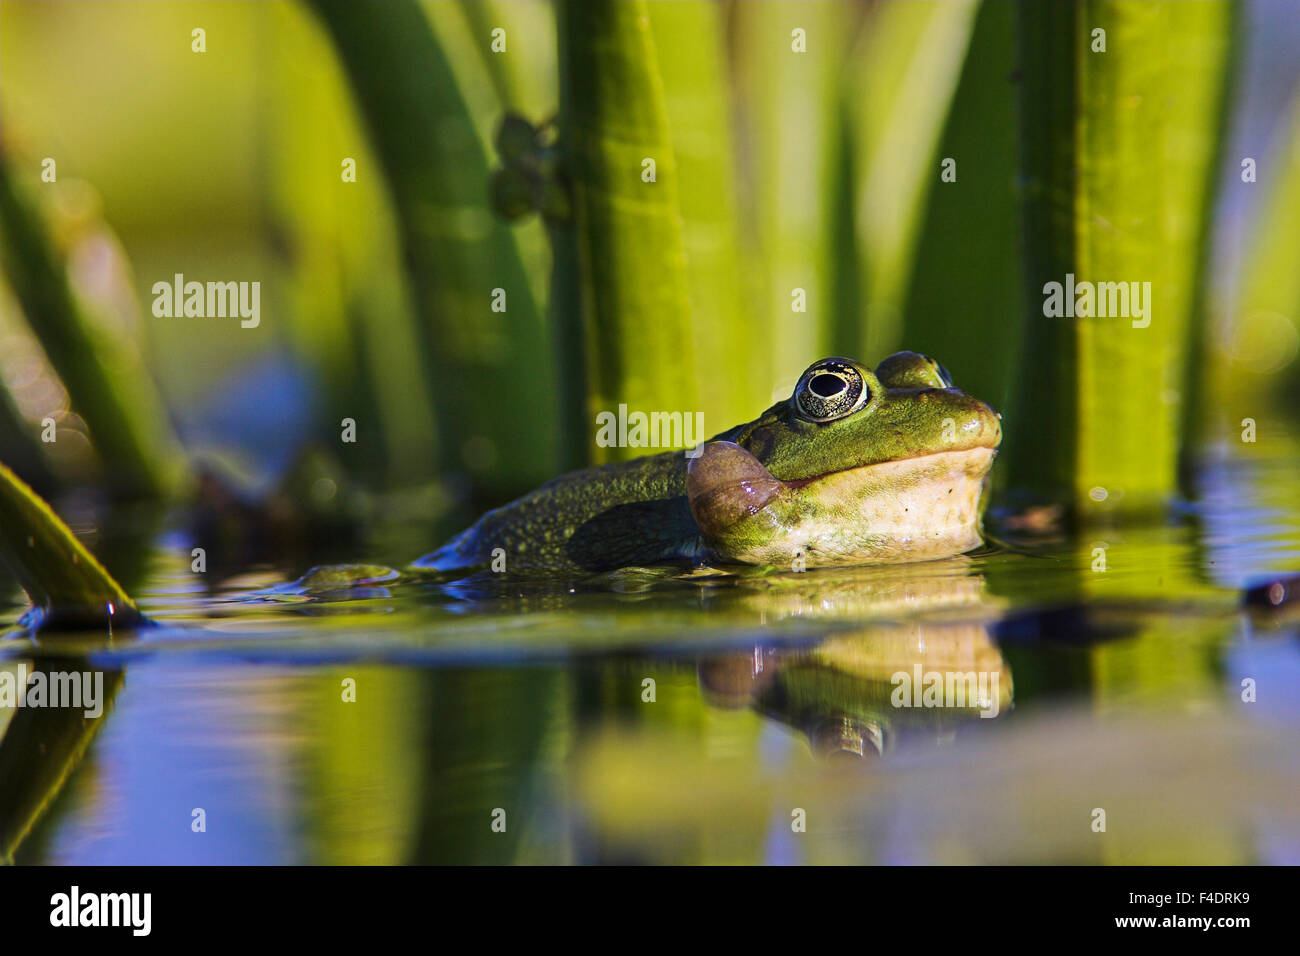 Edible Frog croaking, quacking (Rana esculenta or Pelophylax kl. esculentus) with deflated vocal sac visible in the Danube Delta between dense stands of Water Soldier (Stratiotes aloides) Europe, Eastern Europe, Romania, Danube Delta. Stock Photo